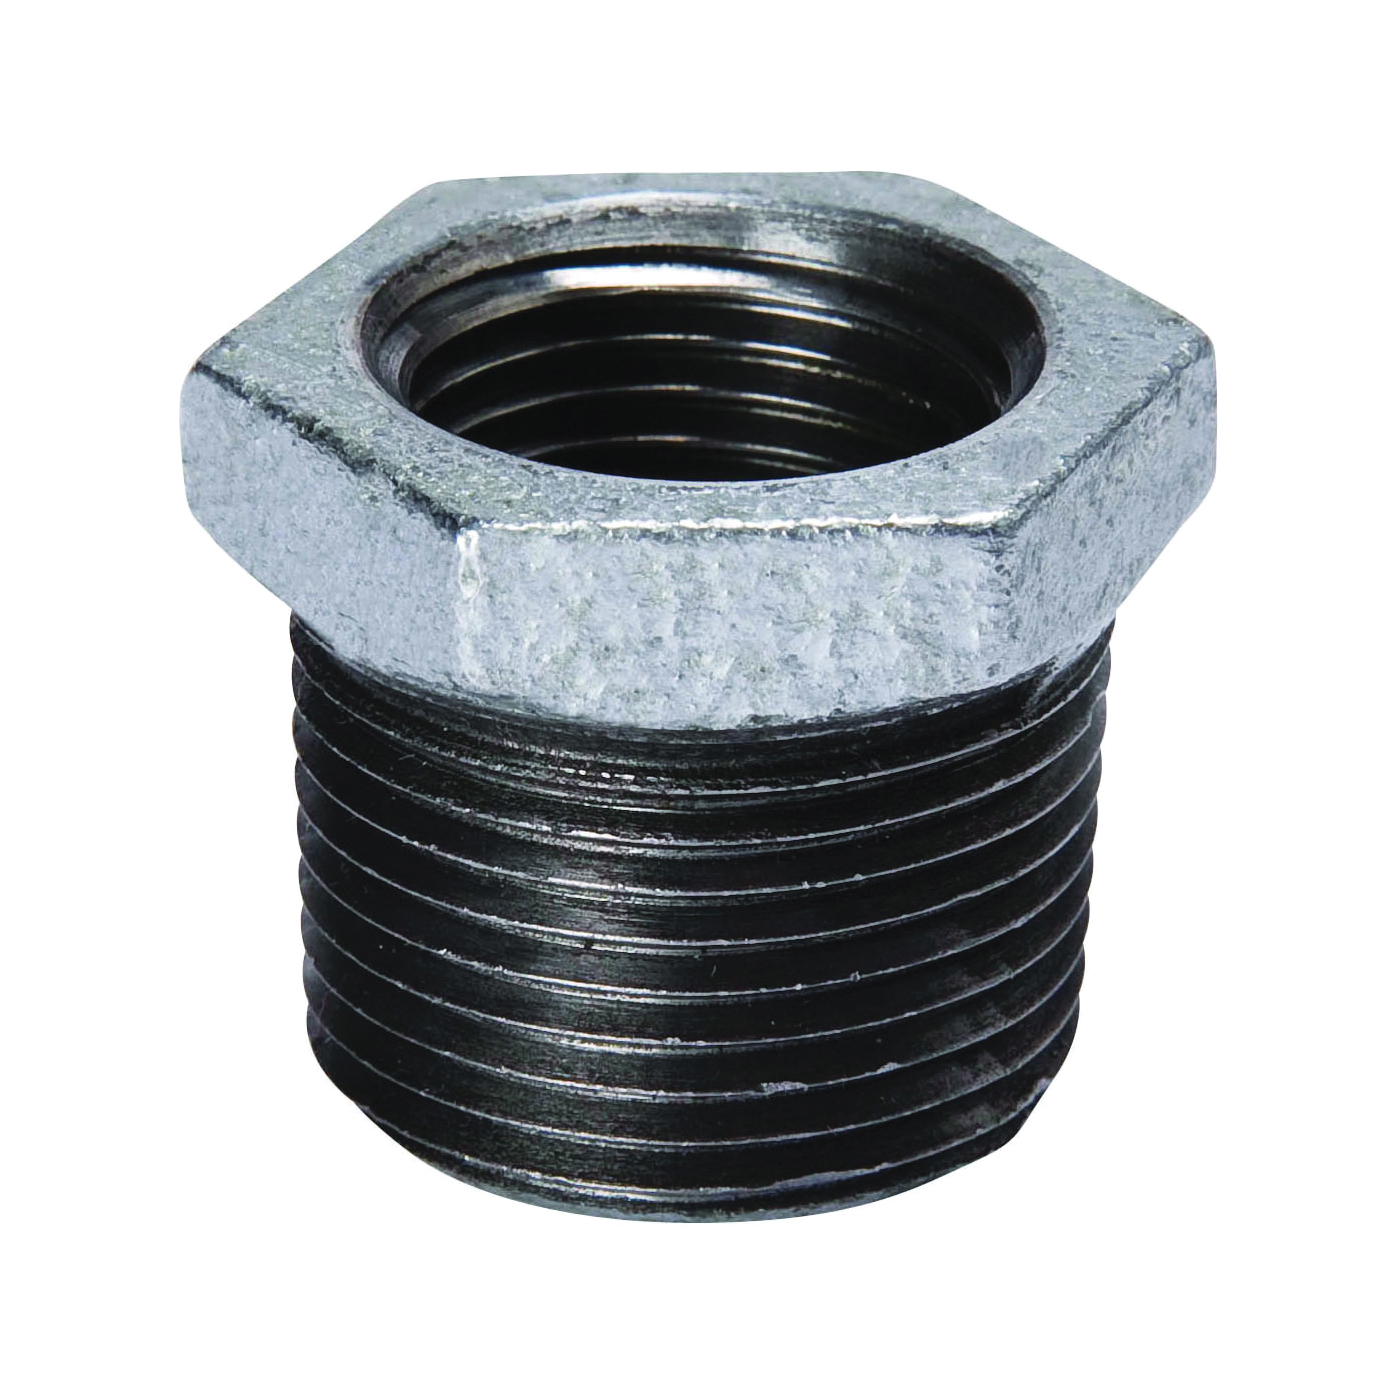 511-918BC Reducing Pipe Bushing, 4 x 2 in, Male x Female